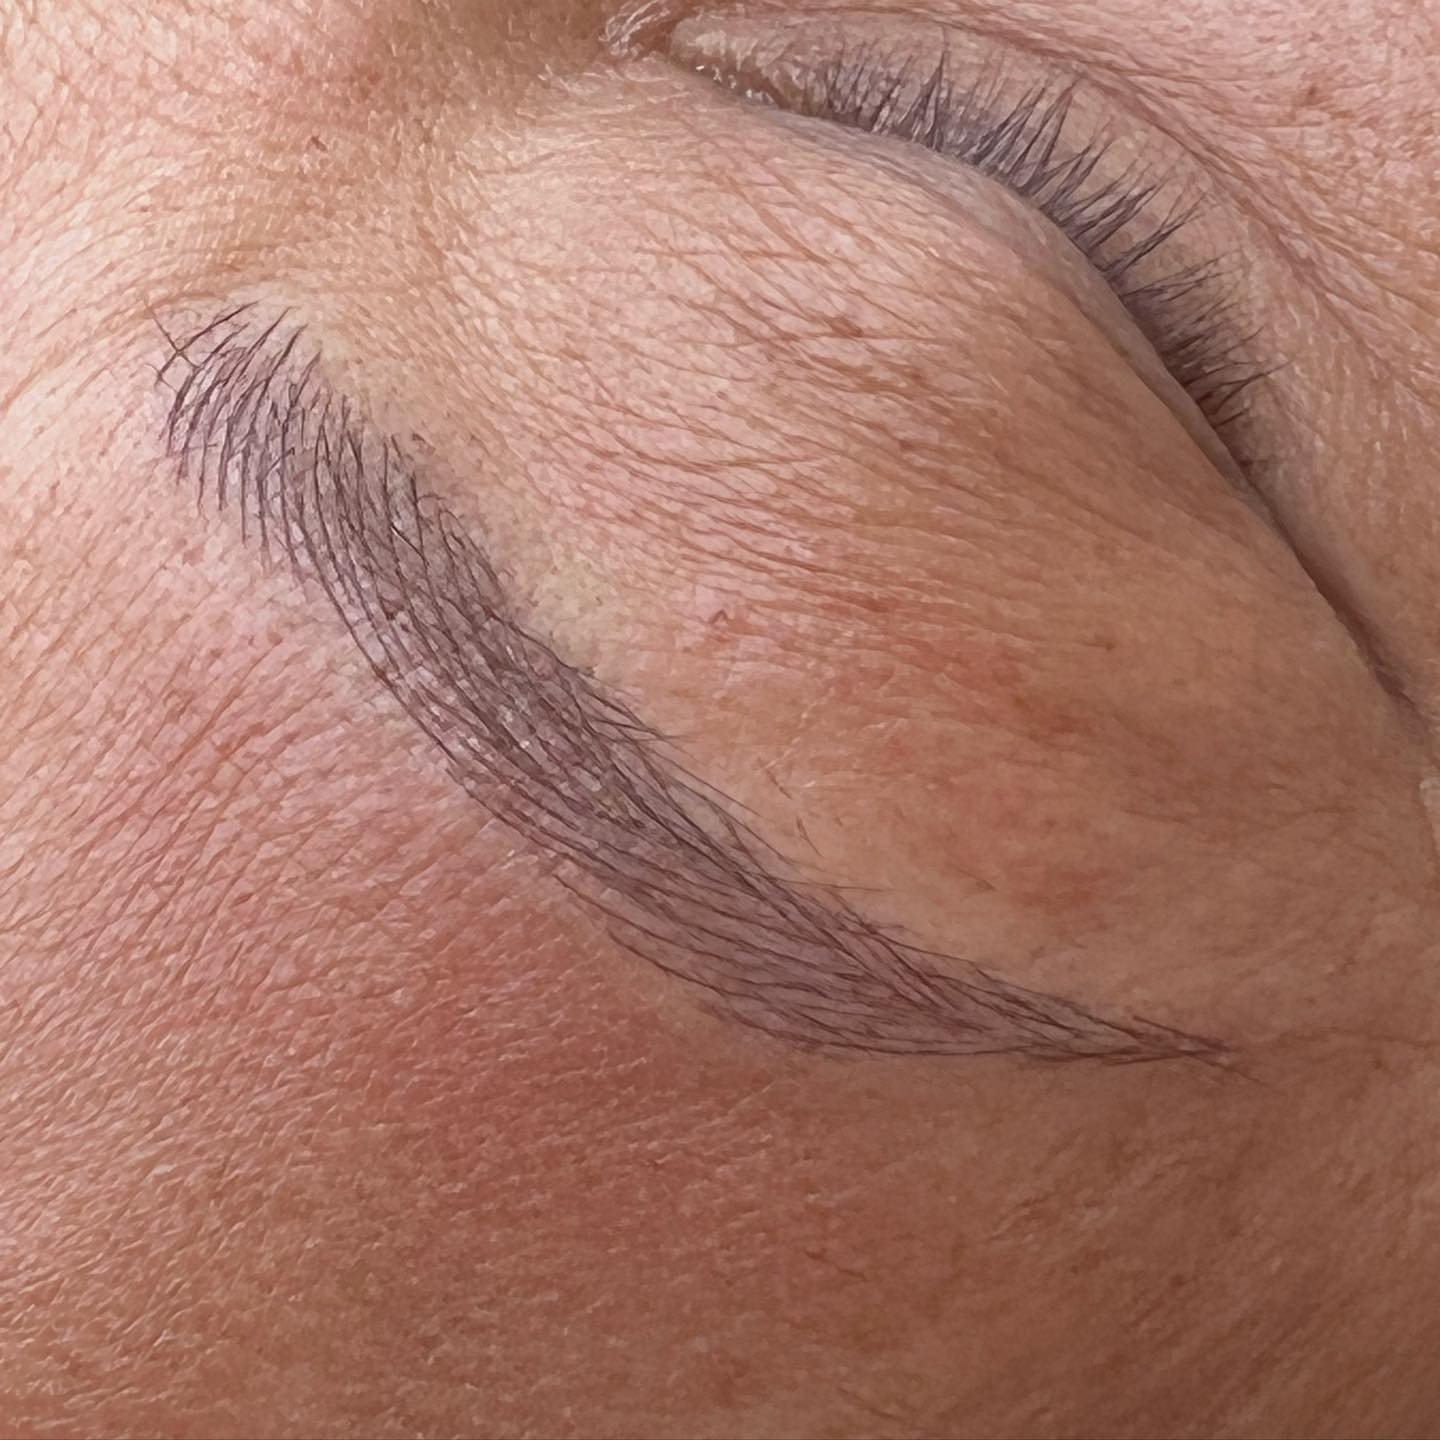 Microblading classic!
Book now be finished for fall. 
Bye bye brows smearing off
See ya later to standing in the mirror drawing them on. 
Hello ready to go!!
Winkandinked.com to book
*** microblading only on dry or normal skin types with no wrinkles or large pores. 
Otherwise choose the lovely alternative called ombré powder brows. 😘
PREVIOUS WORK??? text me a clear focused photo before booking. 
.
.
.
#nhwinkbabe #winkandinked #nhbrows #nhbrowsalon #derrynh #derrybrows #nhblogger #nhsalon #nhbrowspecialist #nhbrowartist #nheyelinertattoo #nhbrowtattoo #microbladingnh #nhmicroblading #browsnh #manchesternh #nashuanh #nhfashion #nhliptattoo #nhtattoo #cosmetictattoonh #nhwinkbrows #nhpermanentmakeup #newhampshire #603brows #nhpowderbrows #nhmakeupartist #nhmakeup #nhlashes